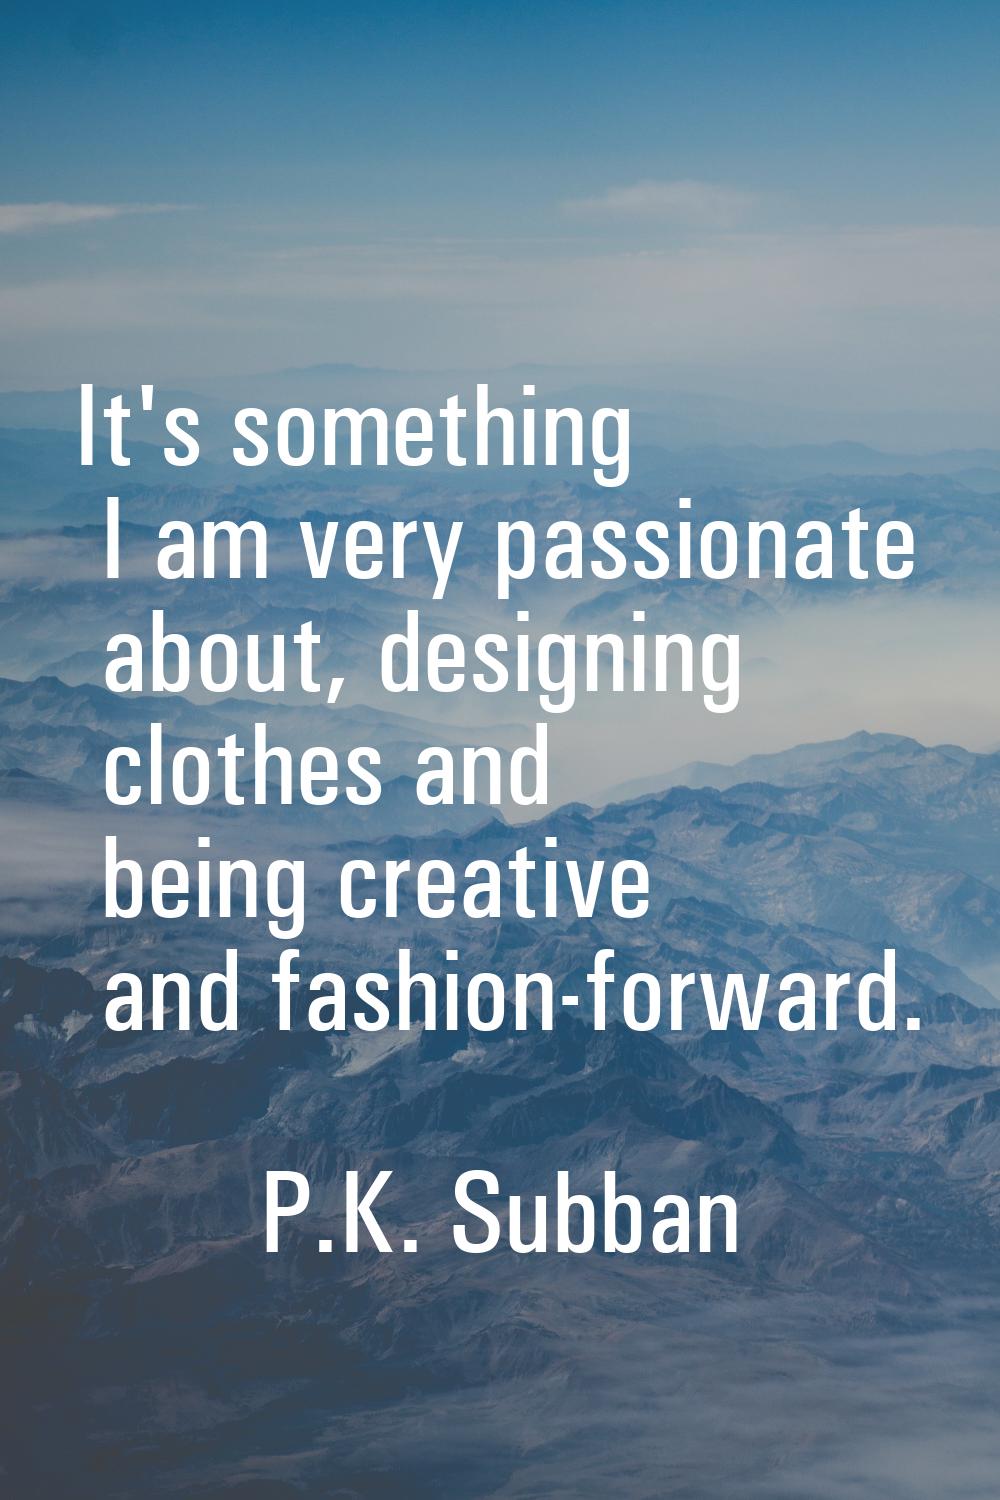 It's something I am very passionate about, designing clothes and being creative and fashion-forward